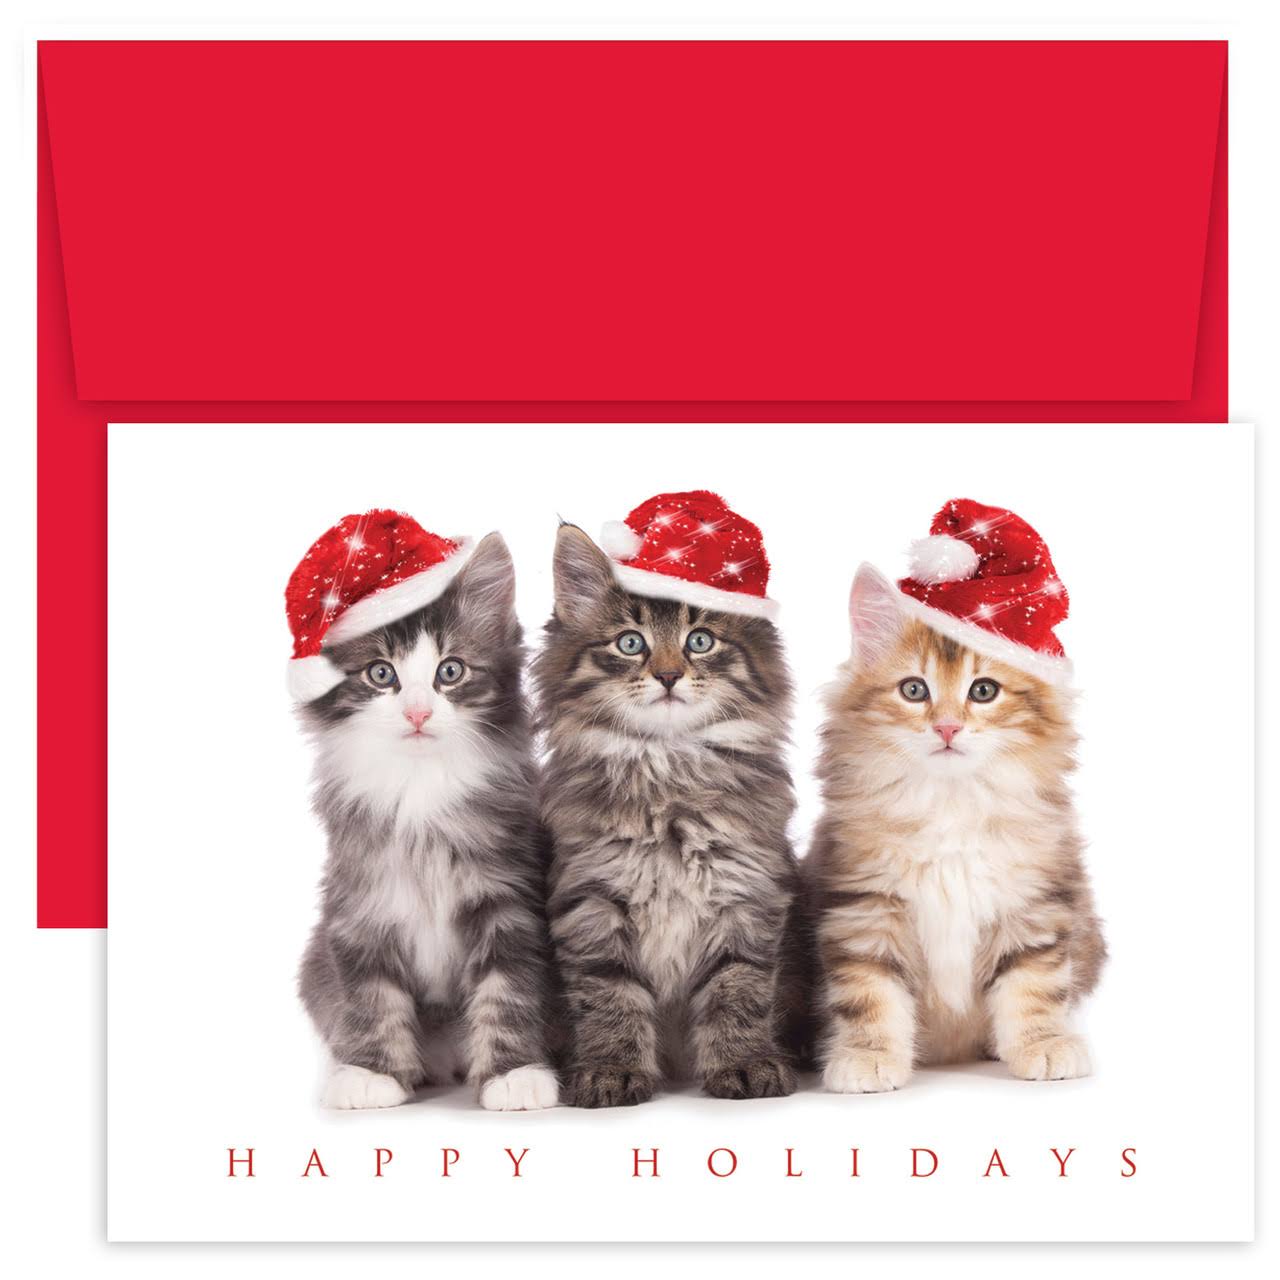 Masterpiece Studios Greeting Card Christmas Kittens 'Happy Holiday' Notecard Set One-Size